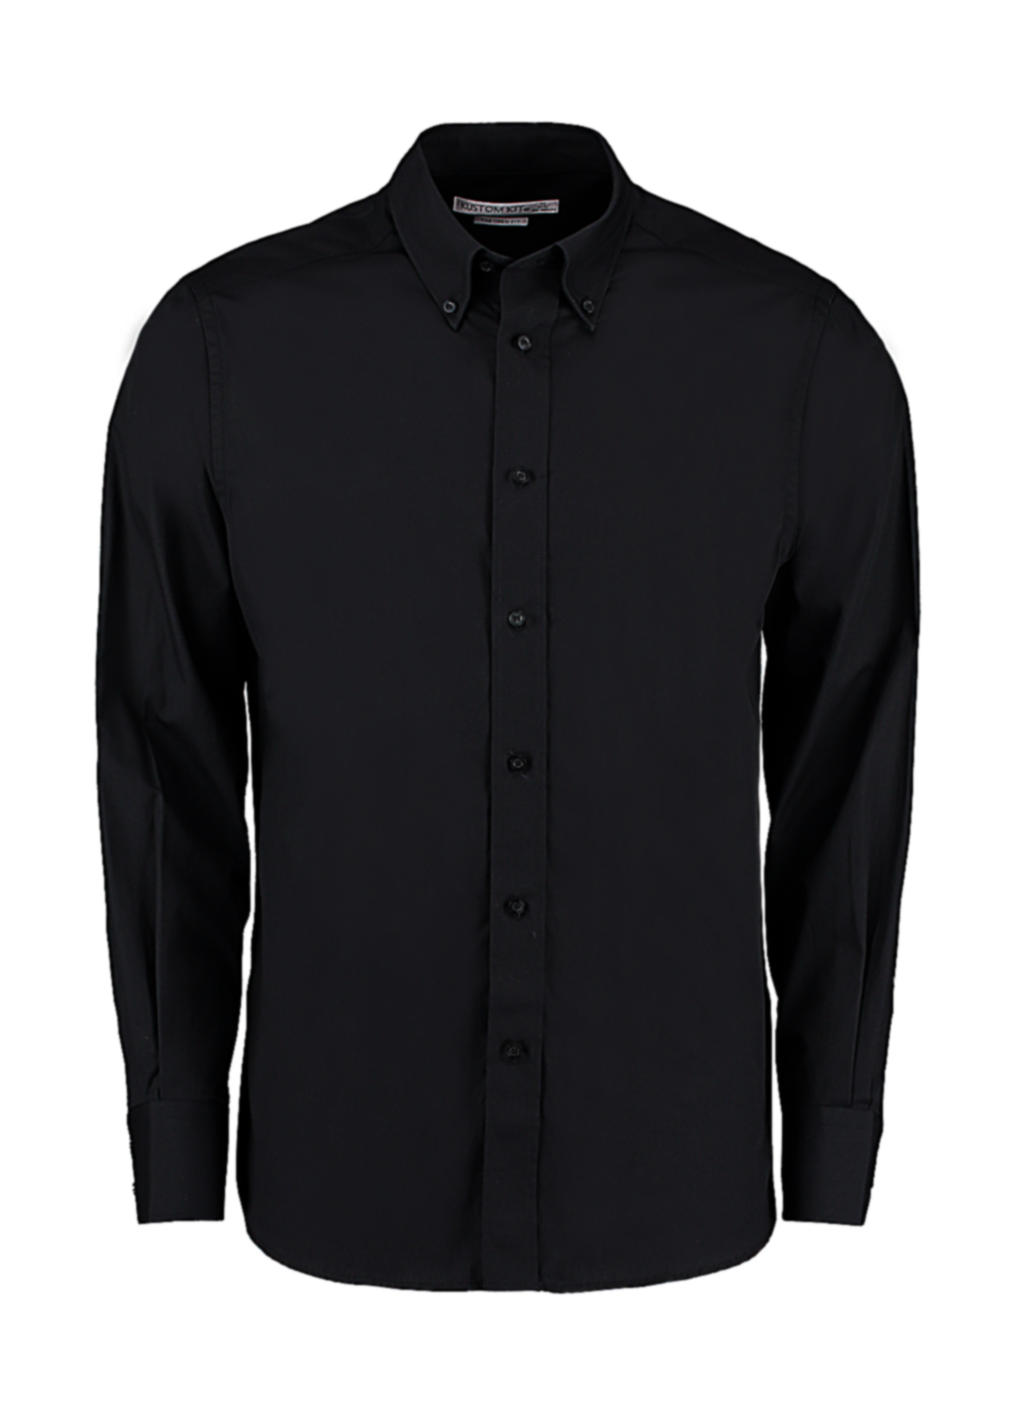 724.11 / Tailored Fit City Shirt / Black